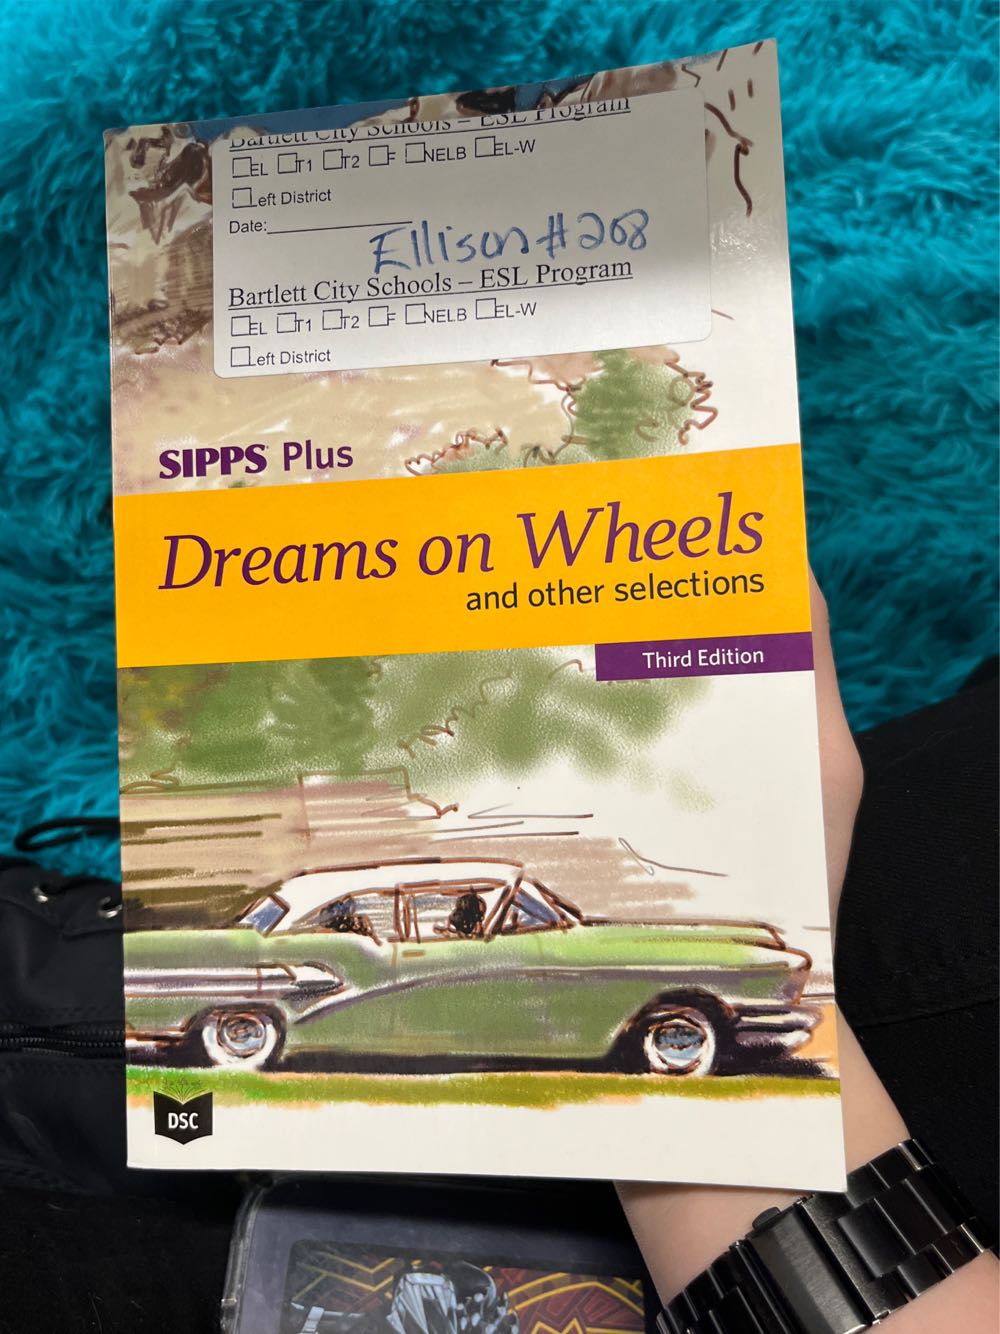 SIPPS Plus, Third Edition, Dreams on Wheels Reader (1) - John Shefelbine book collectible [Barcode 9781610032124] - Main Image 1